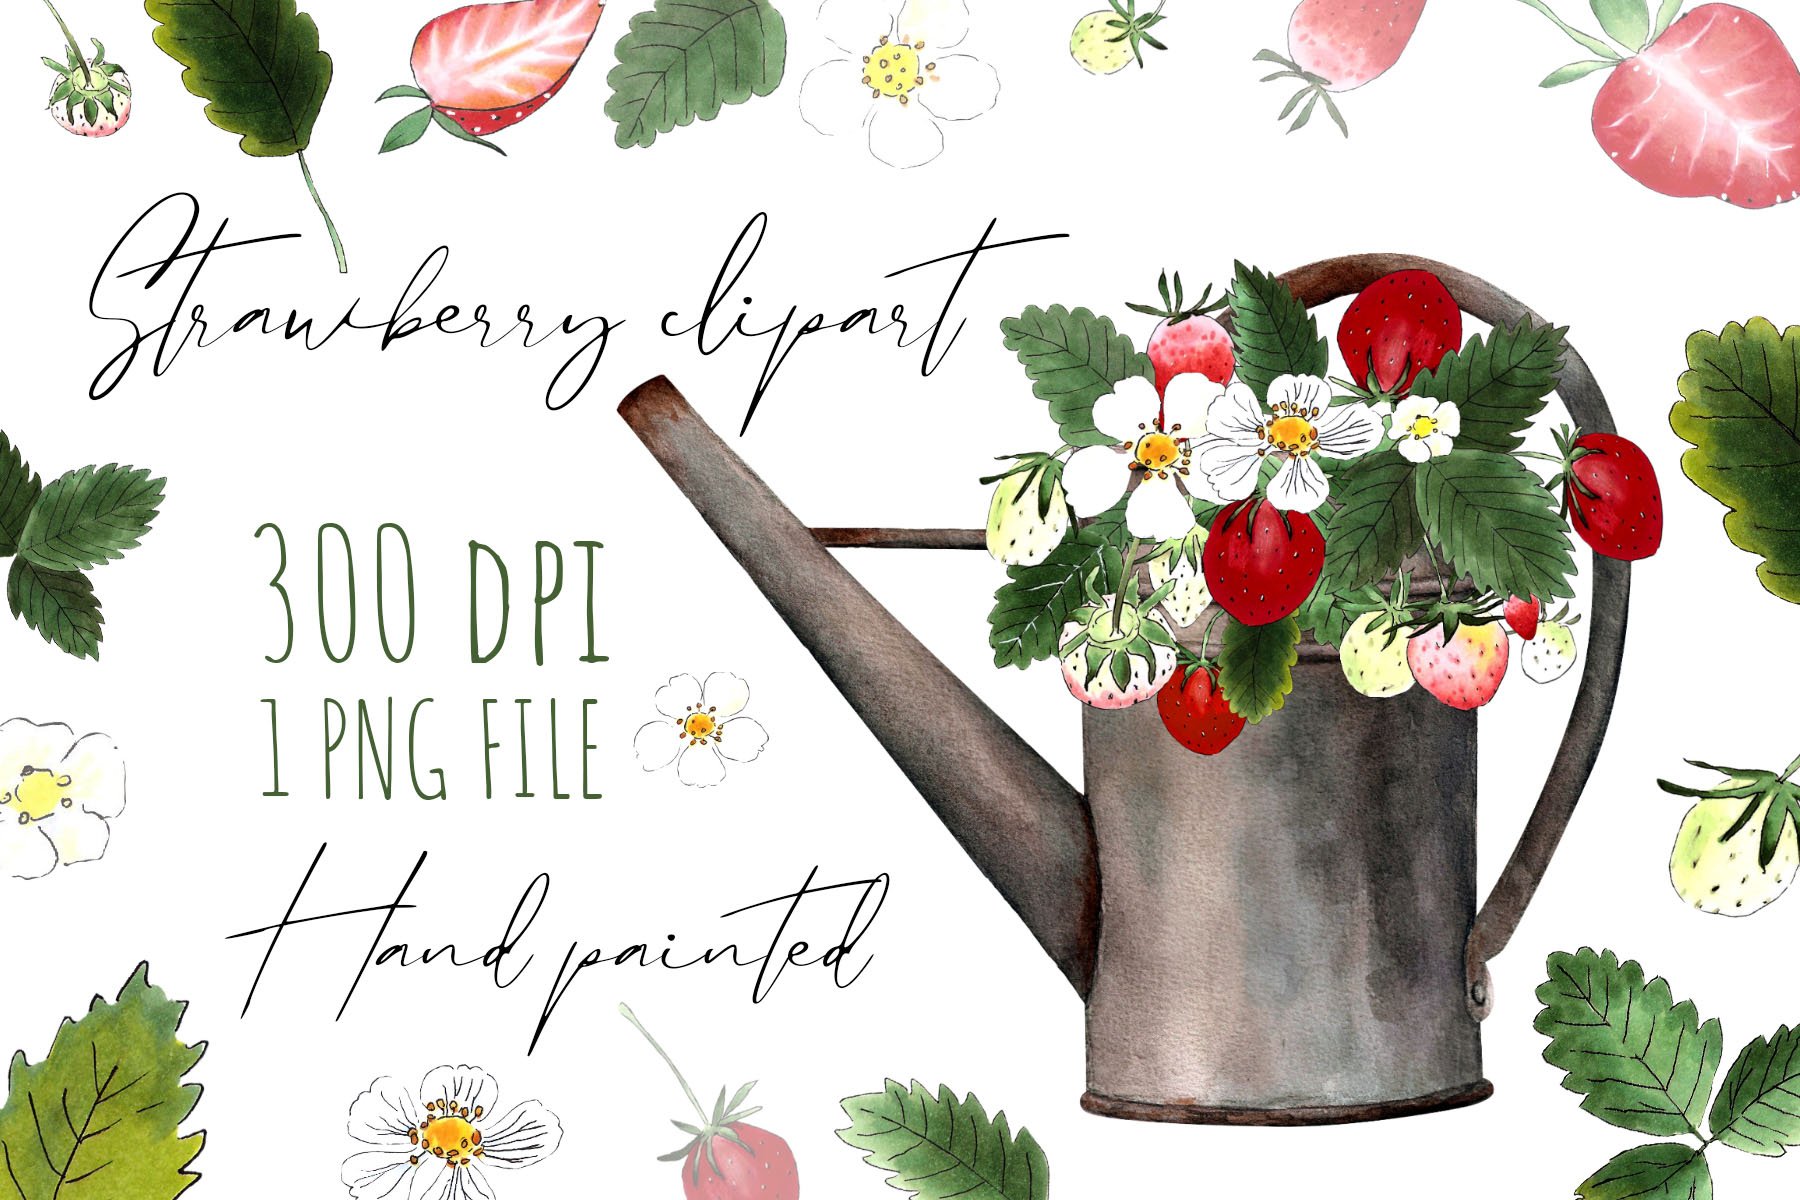 Watercolor illustration of a strawberry in watering can and black lettering "Strawberry clipart Hand painted".